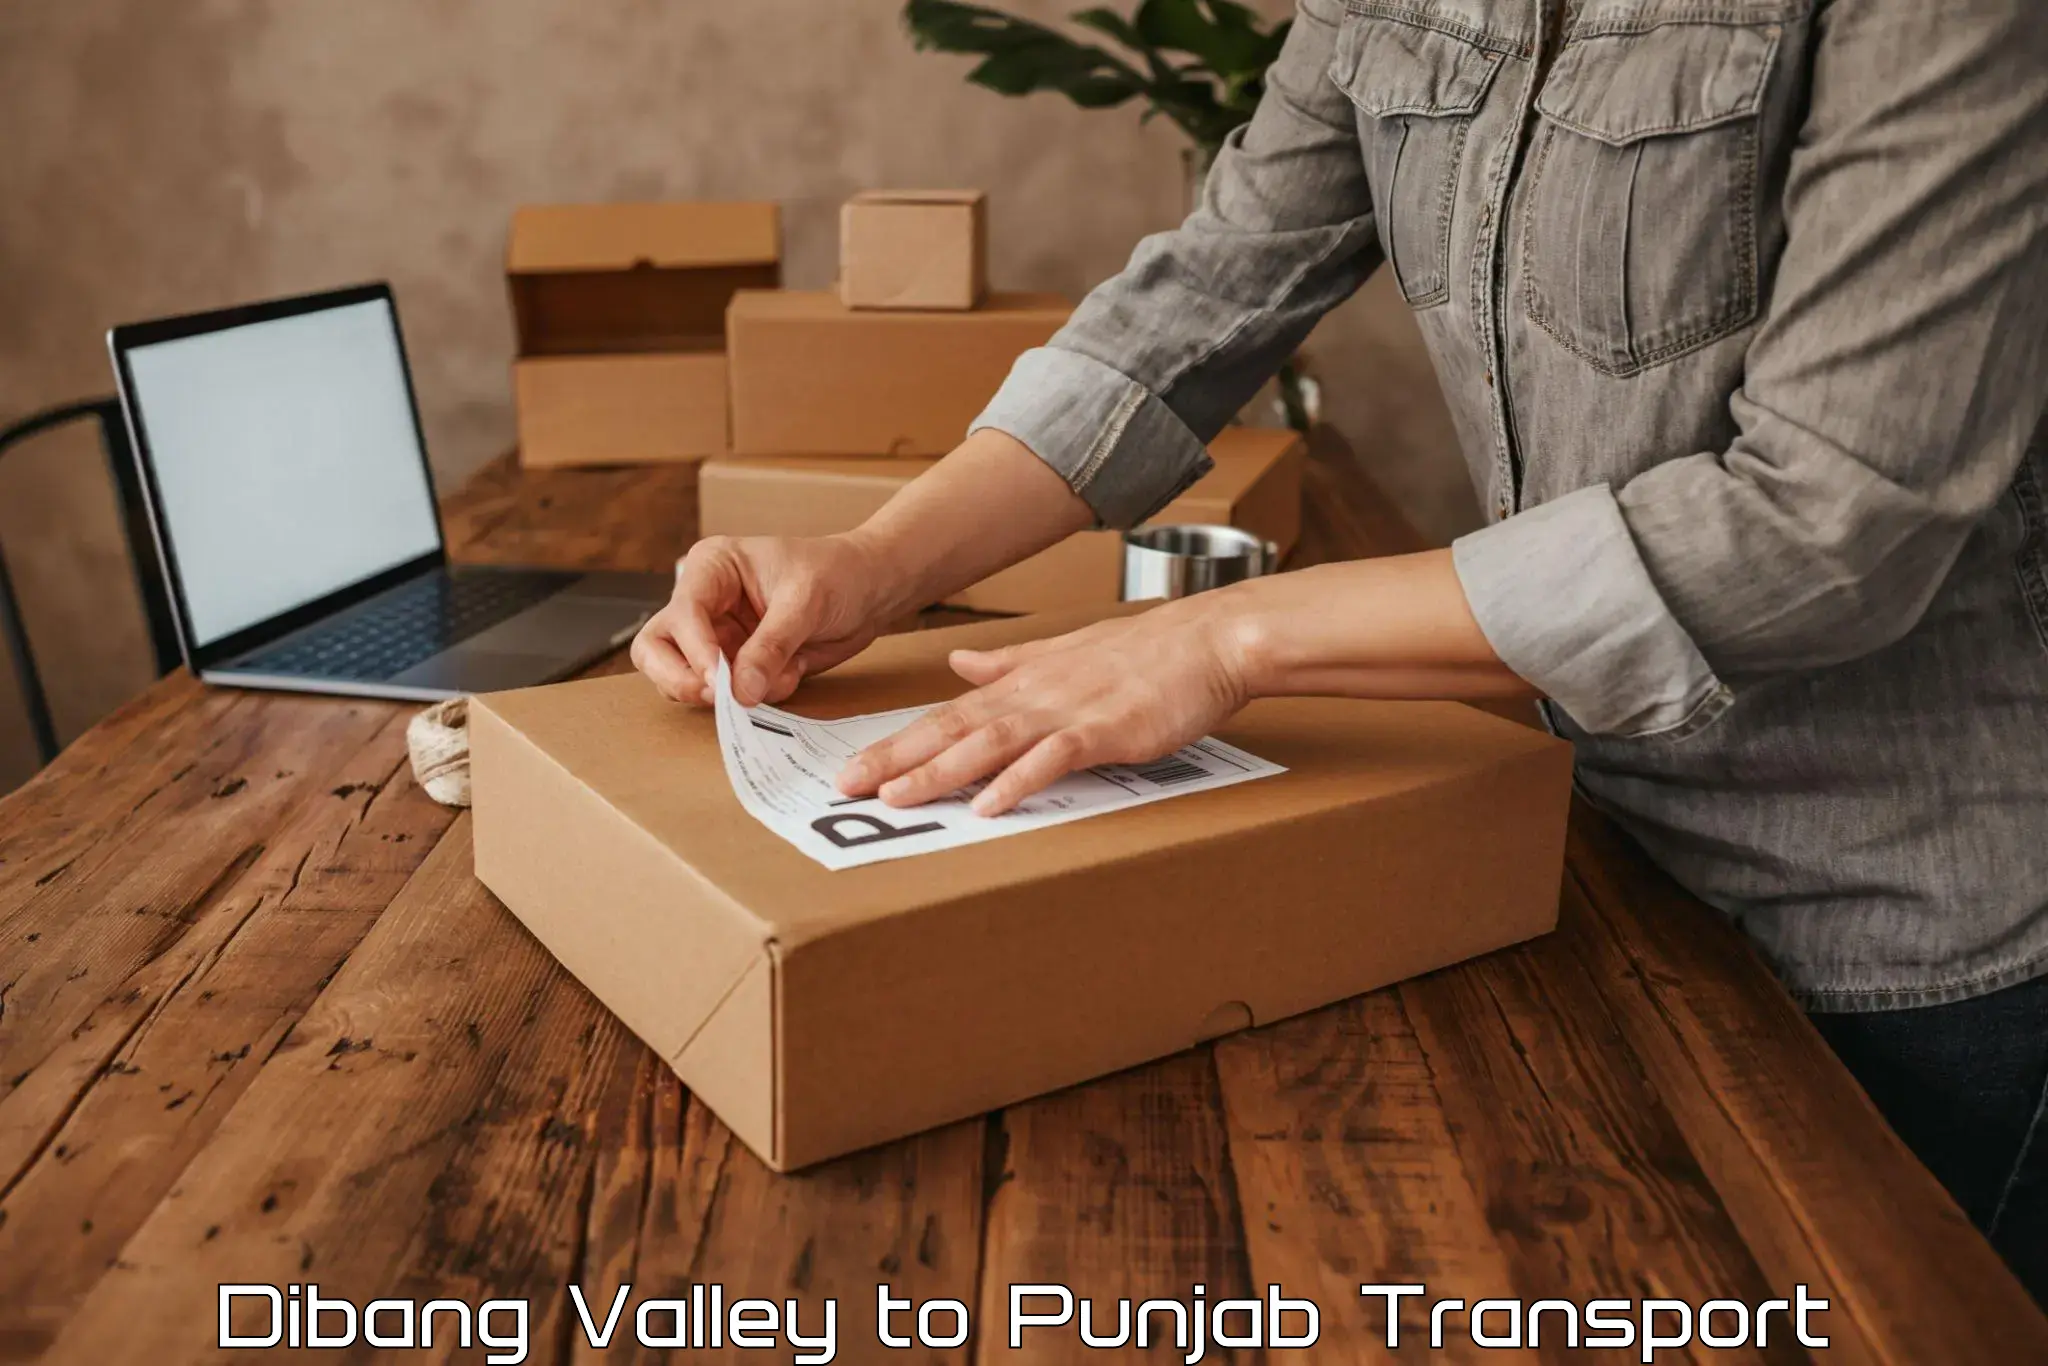 Online transport service Dibang Valley to Firozpur